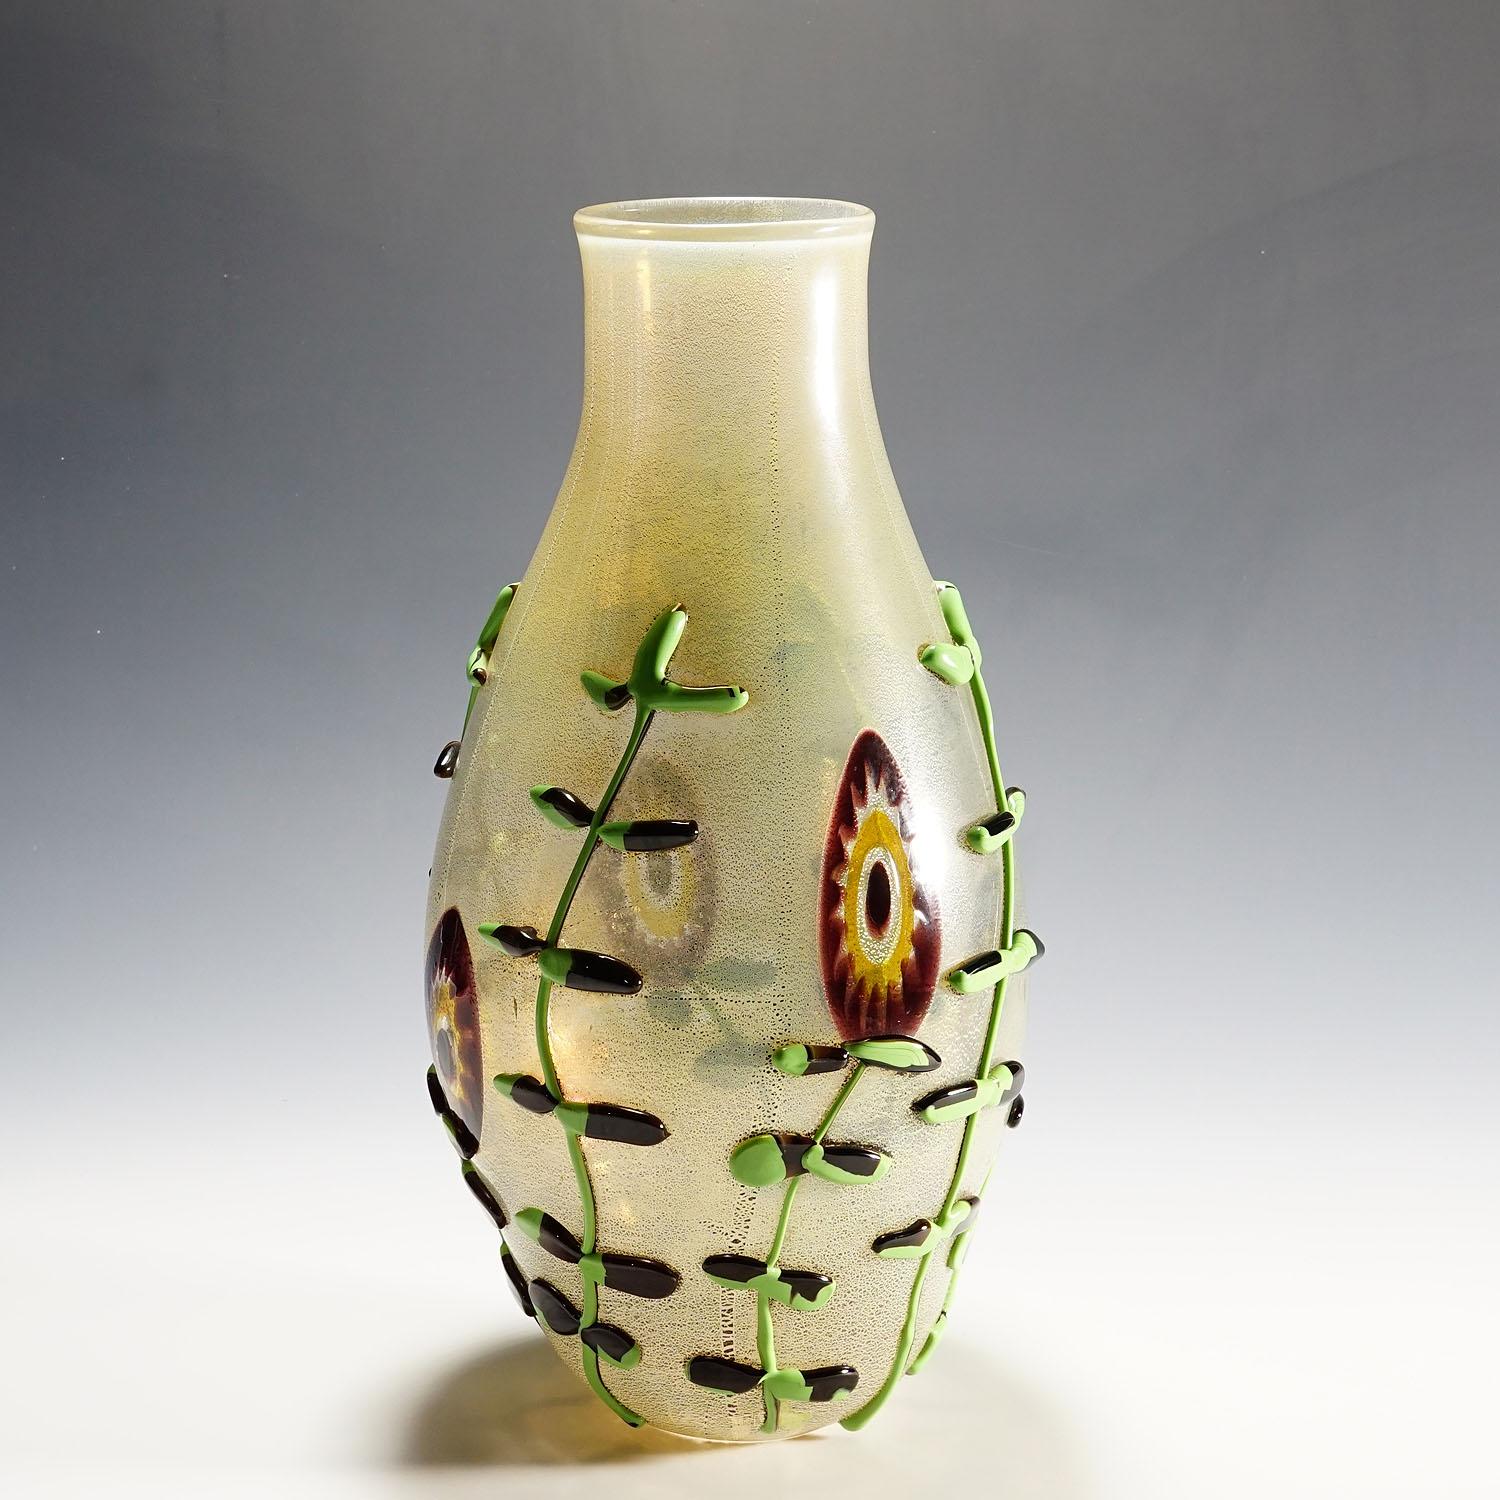 Monumental Art Glass Vase by Licio Zanetti, Murano, circa 1970s

A large art glass vase handmade by glass master Licio Zanetti, circa 1970s for Zanetti Murano SRL. Free formed clear glass body decorated with melted blossoms and craceled gold foil